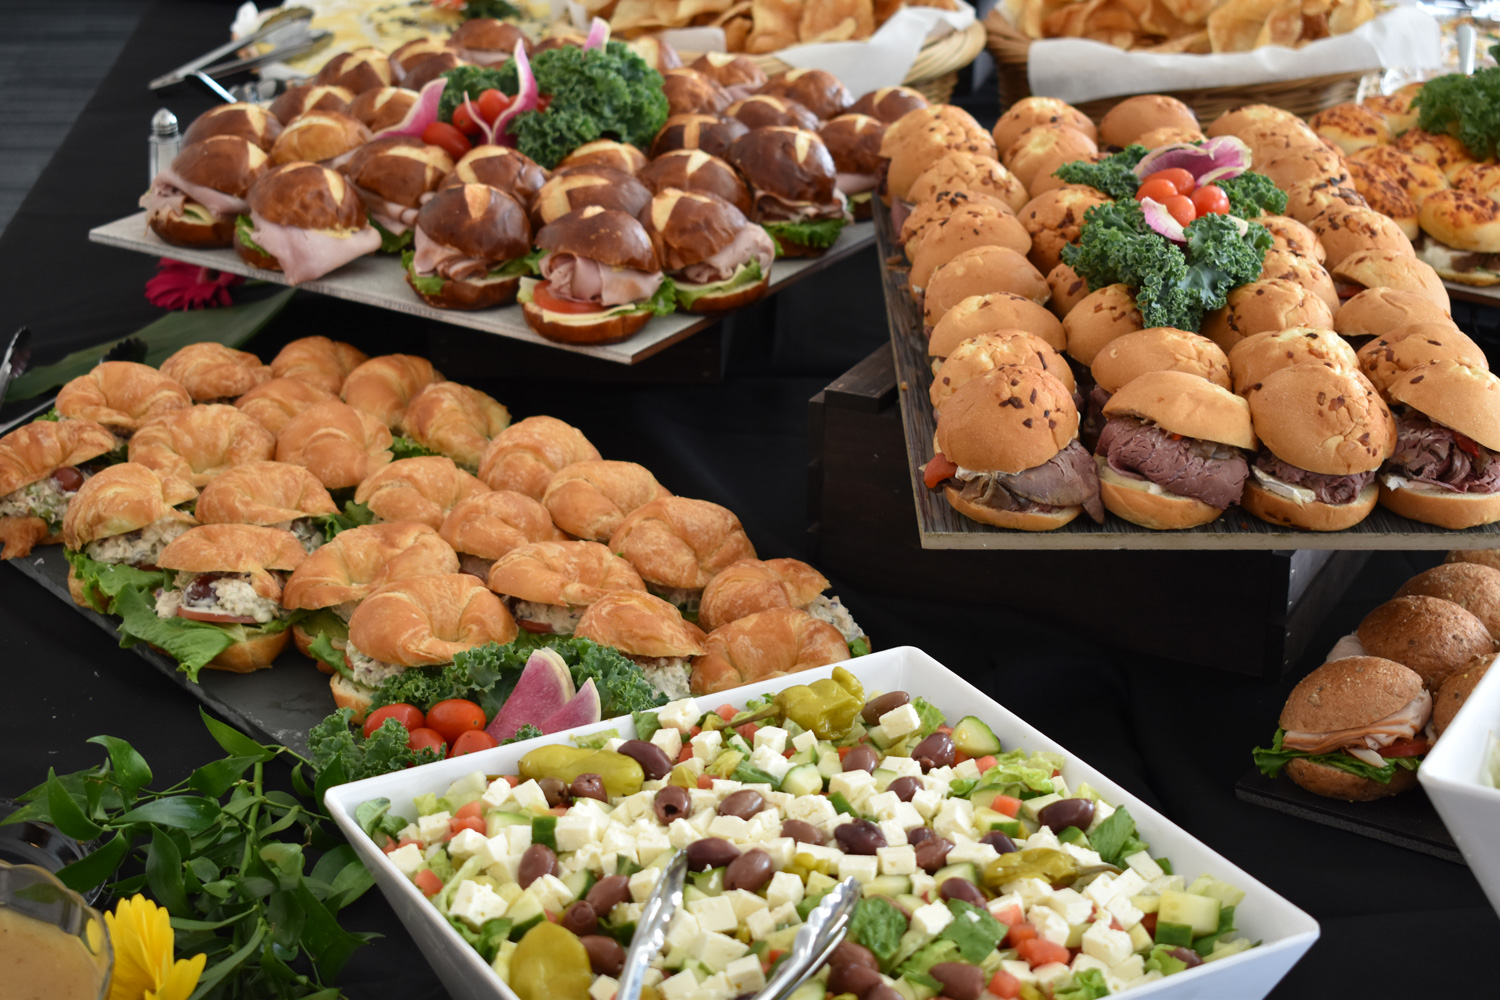 Corporate event planner praising Pear Tree Catering services